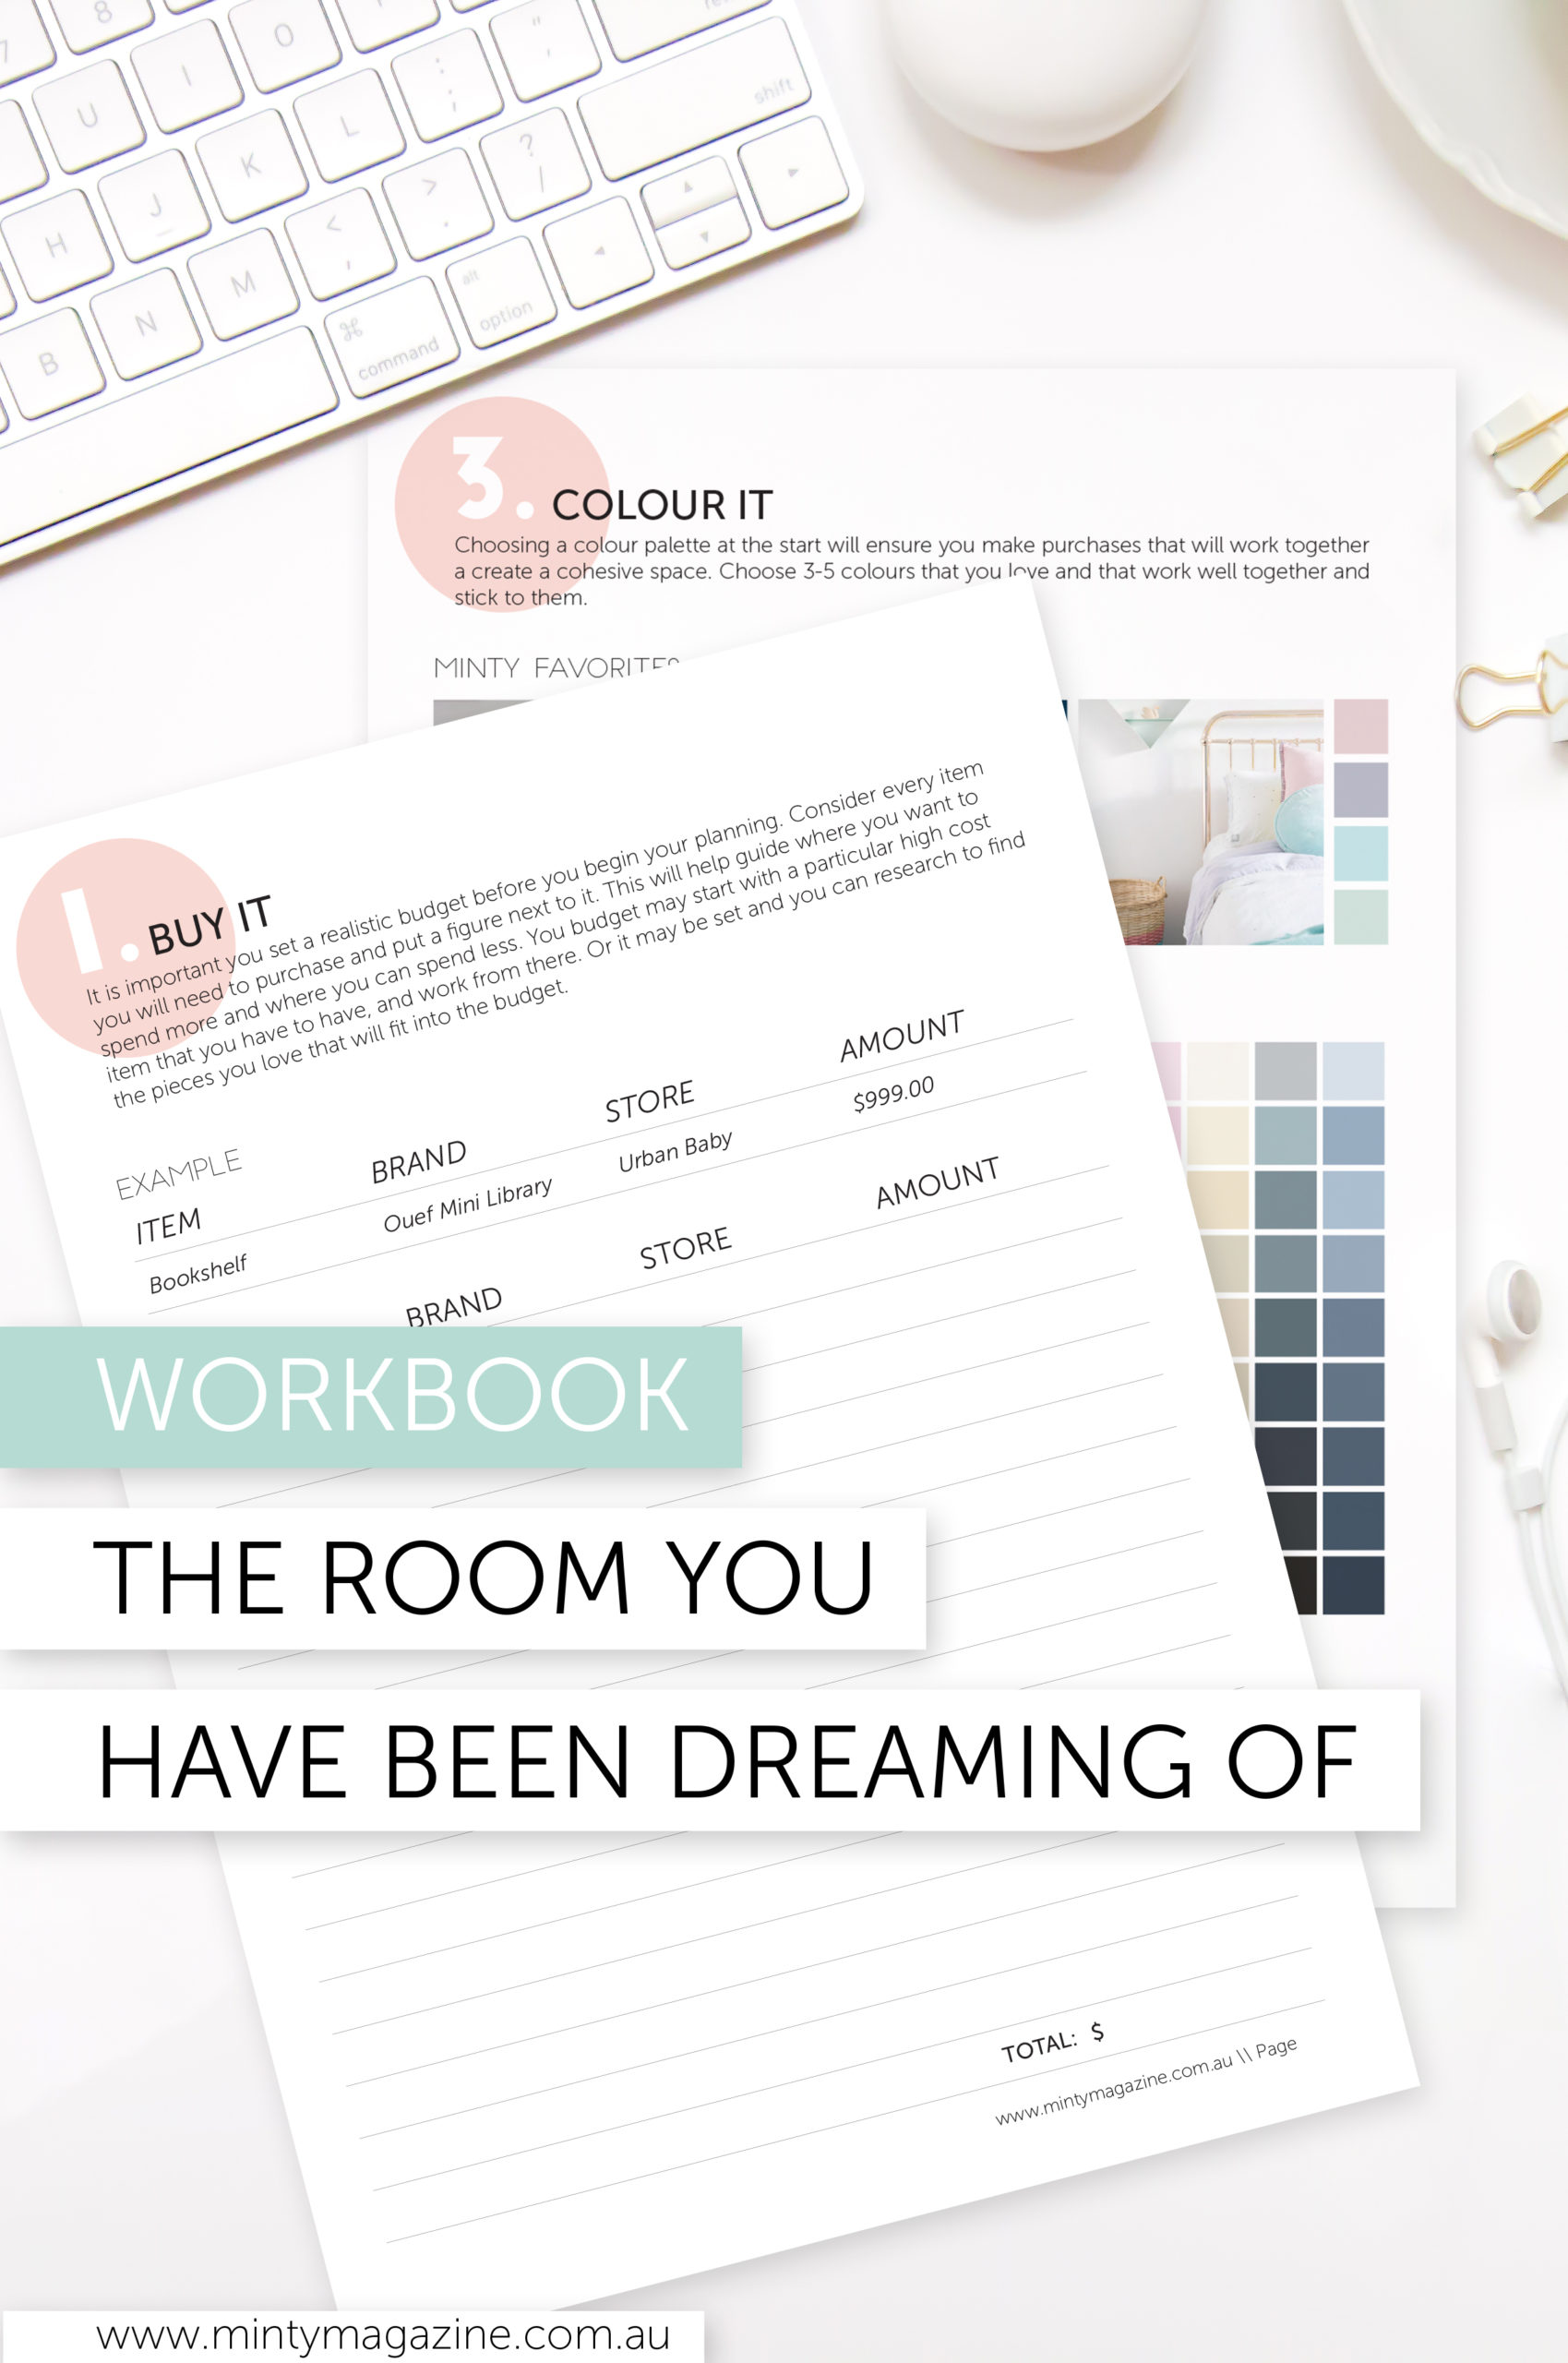 Minty Magazine Free Resources The Room You Have Been Dreaming Of Workbook